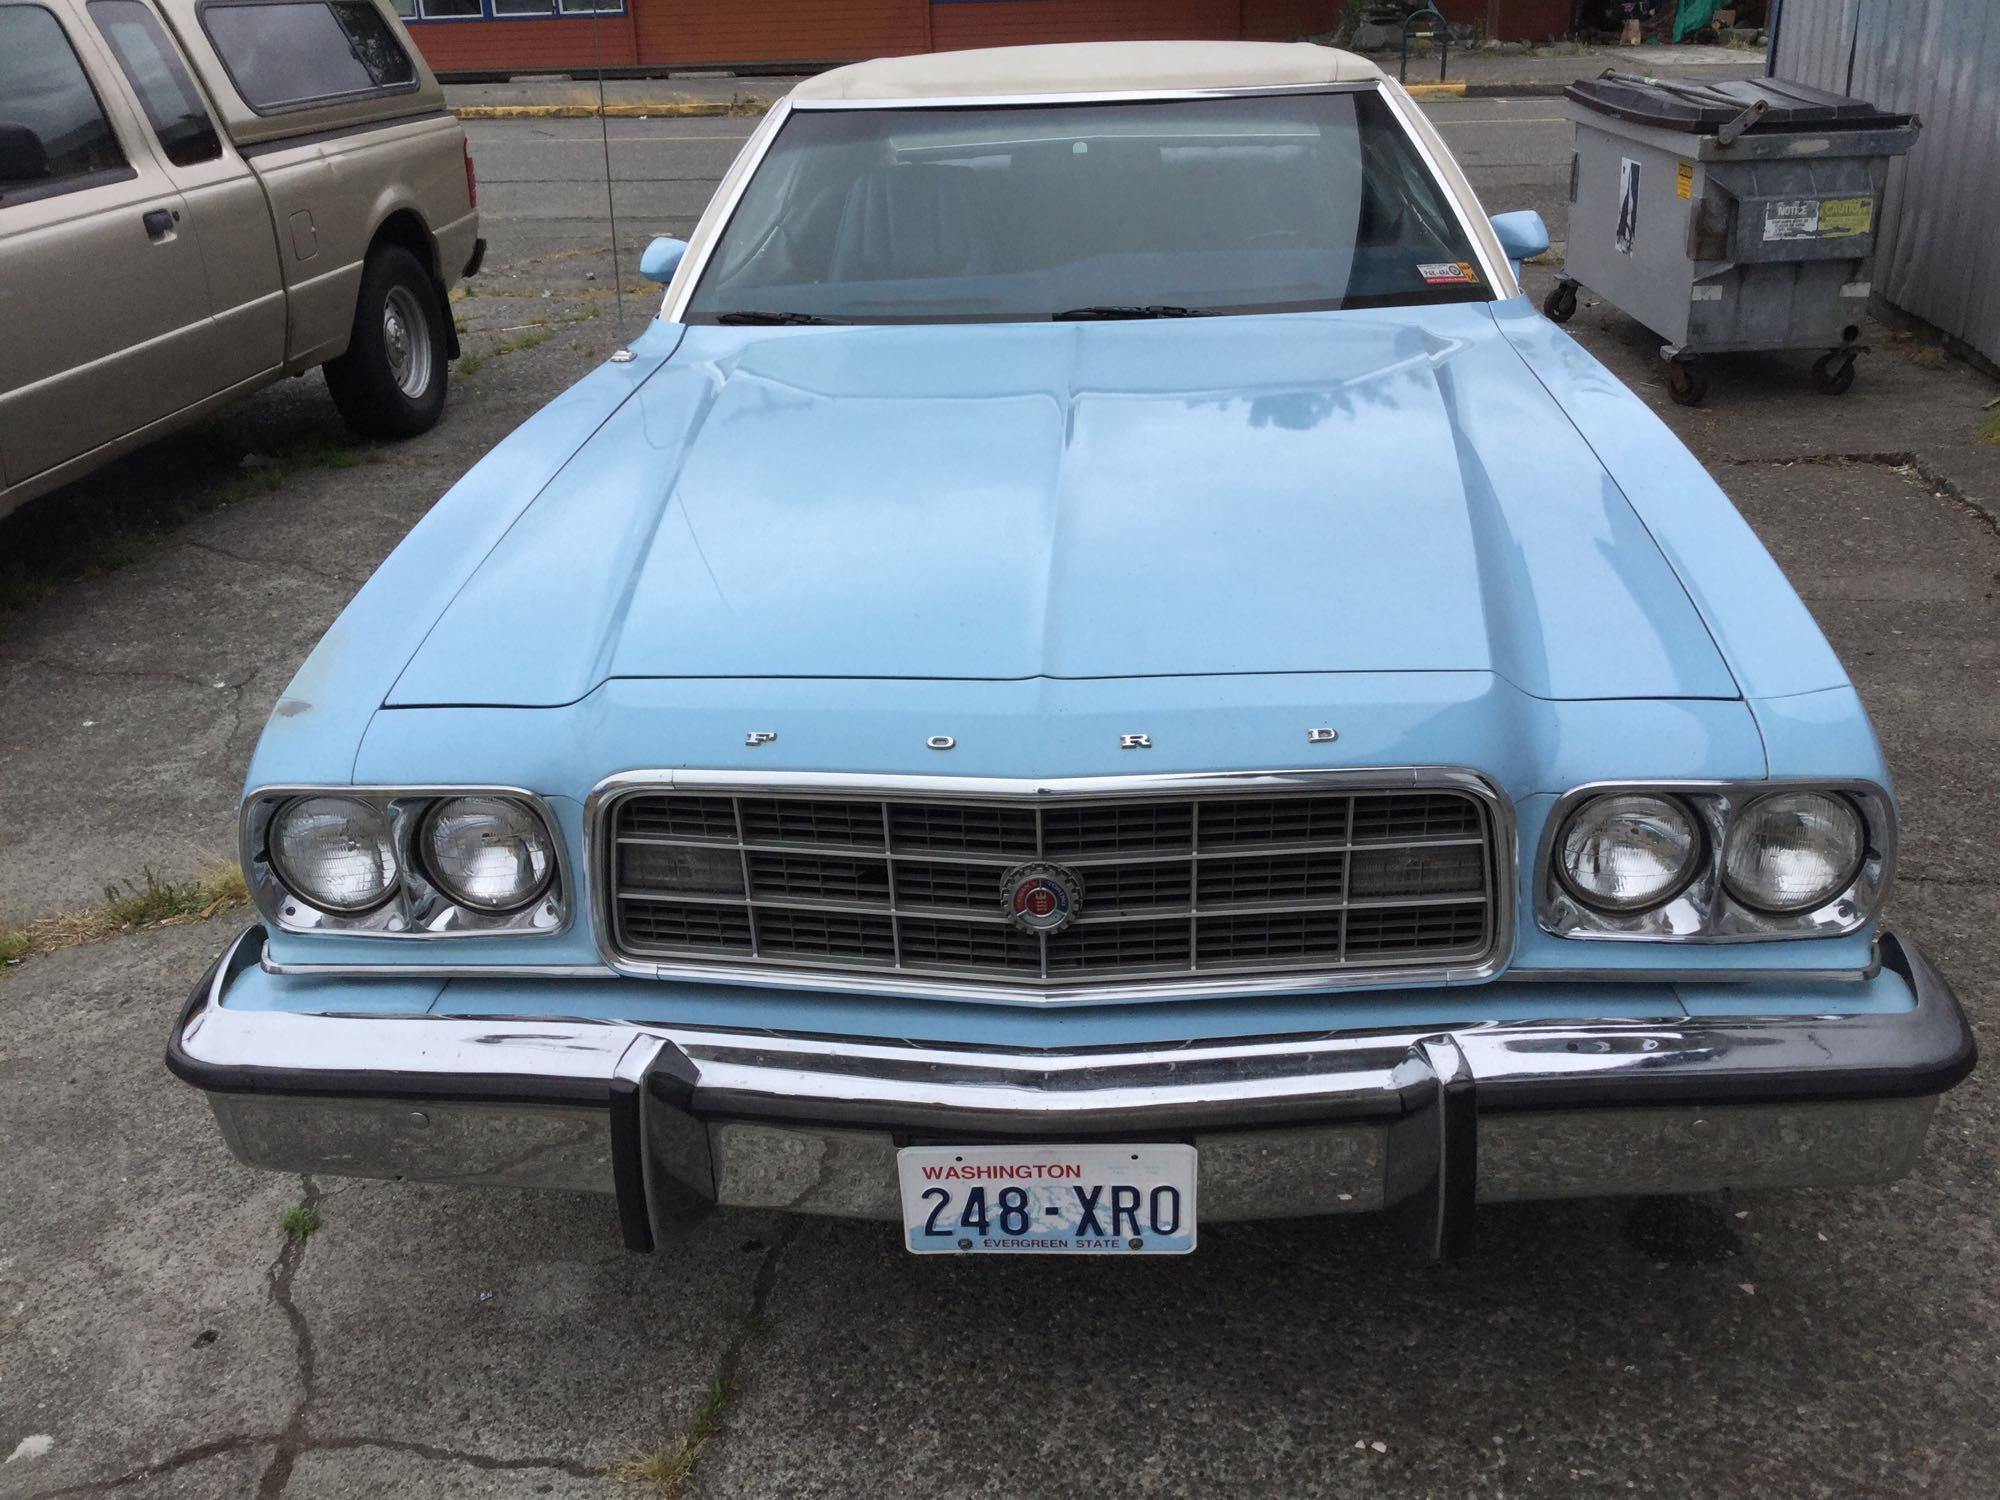 A powder blue 1973 Ford Gran Torino 2 door sport coupe w/ 351 windsor engine